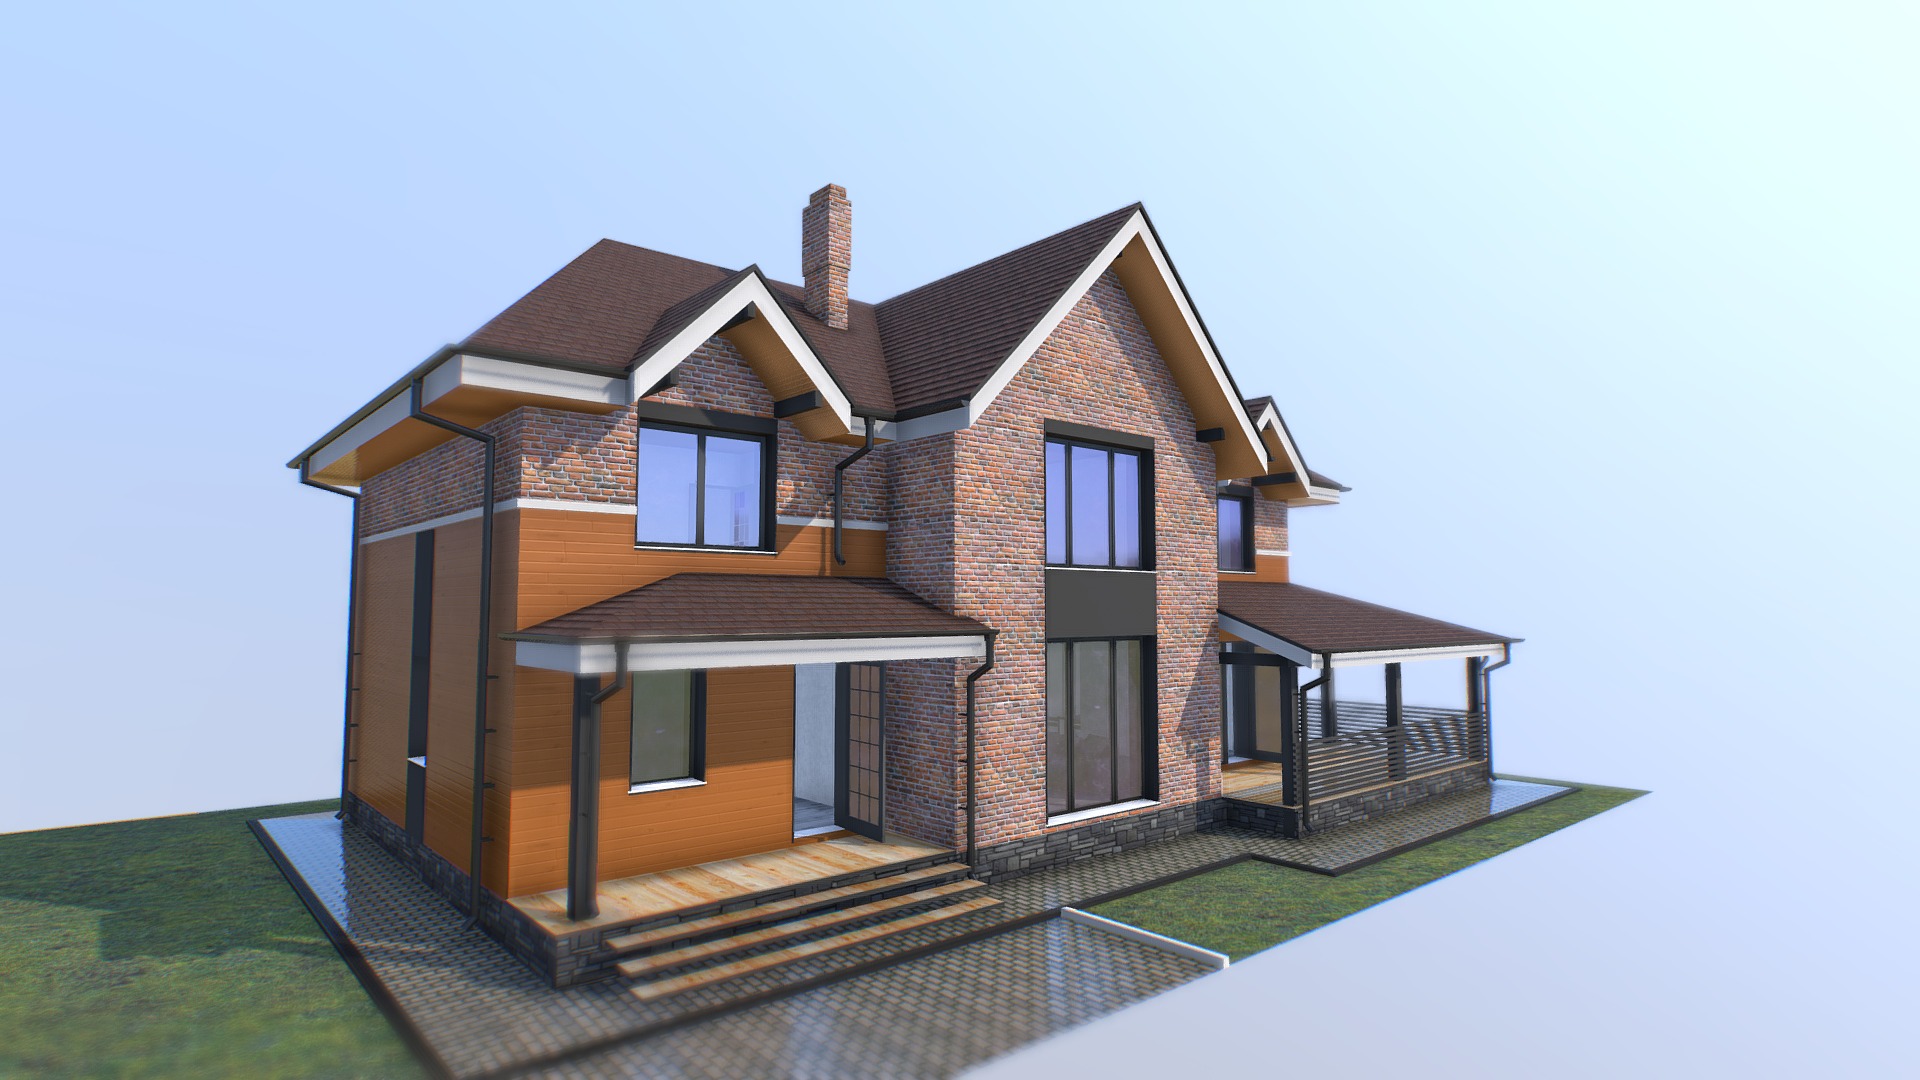 3D model Residential-house-2020-updated-03.20 - This is a 3D model of the Residential-house-2020-updated-03.20. The 3D model is about a house with a pool.